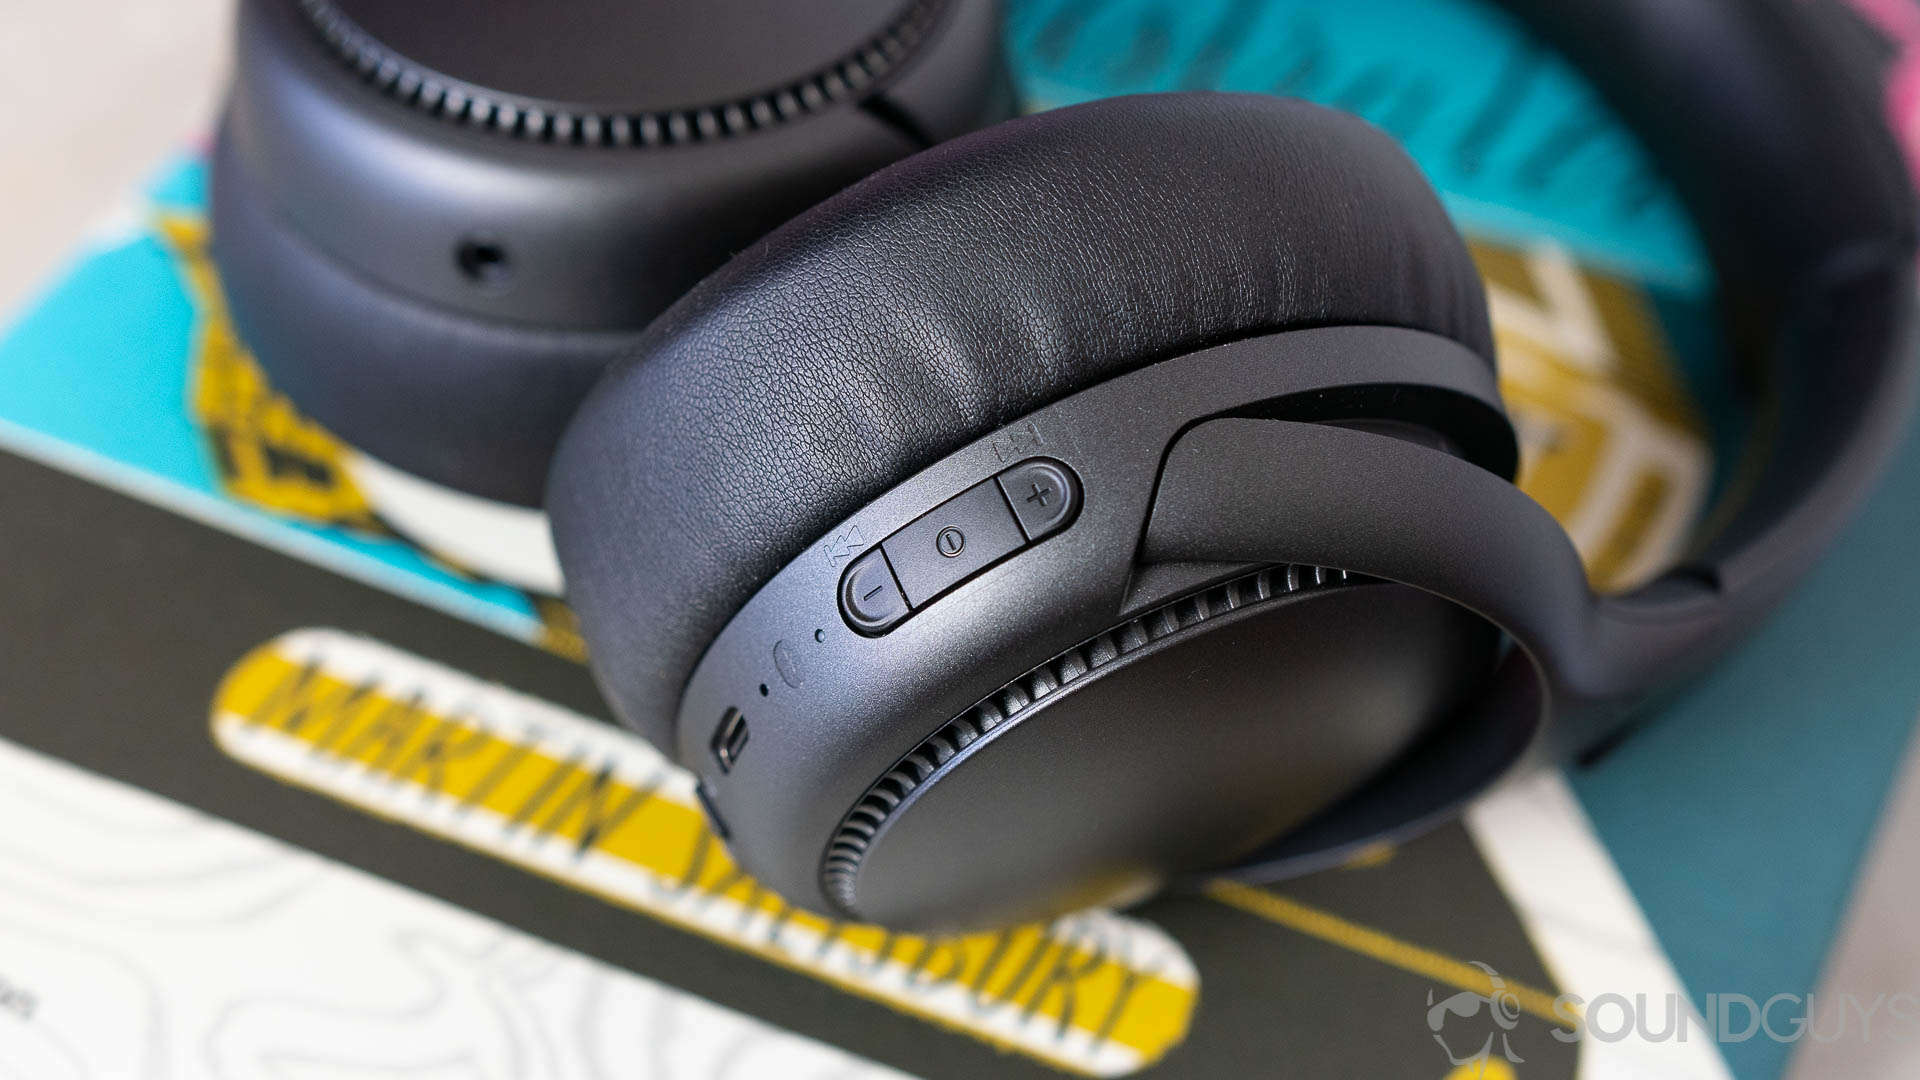 Close-up shot of the playback controls for the Panasonic RB-M700B headphones.